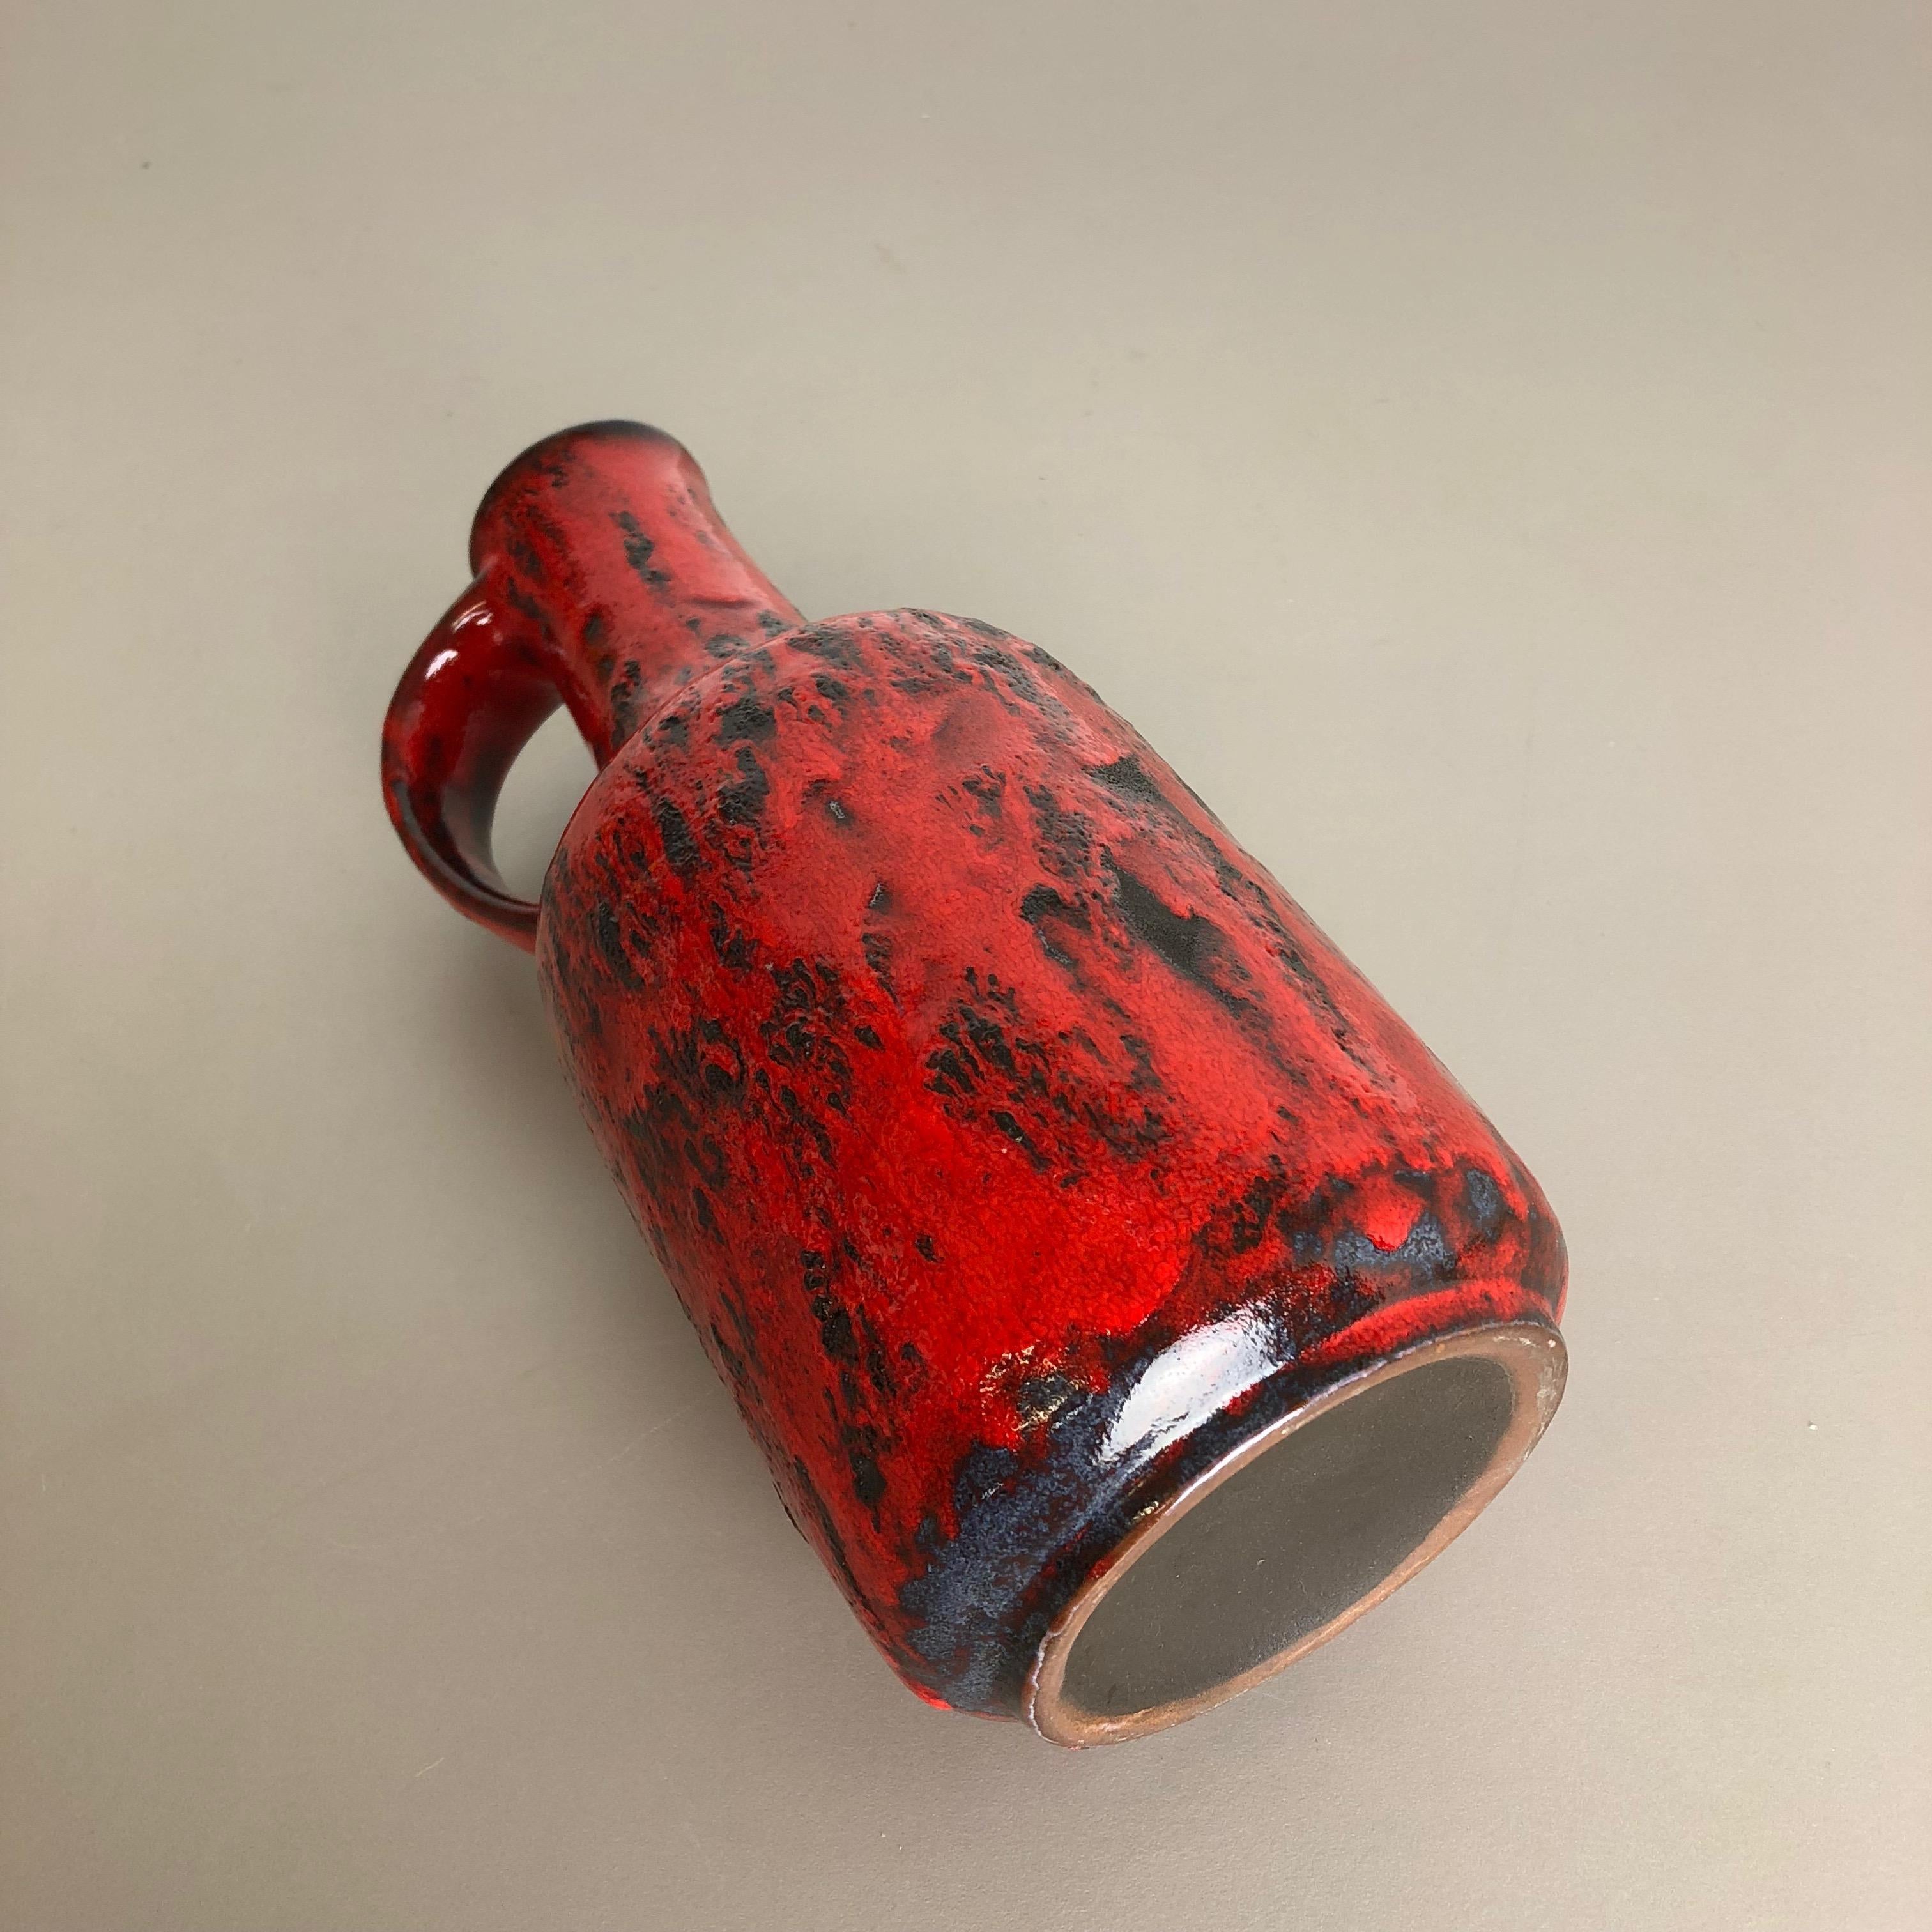 Super Colorful Fat Lava Pottery Vase by Gräflich Ortenburg, Germany, 1950s For Sale 7